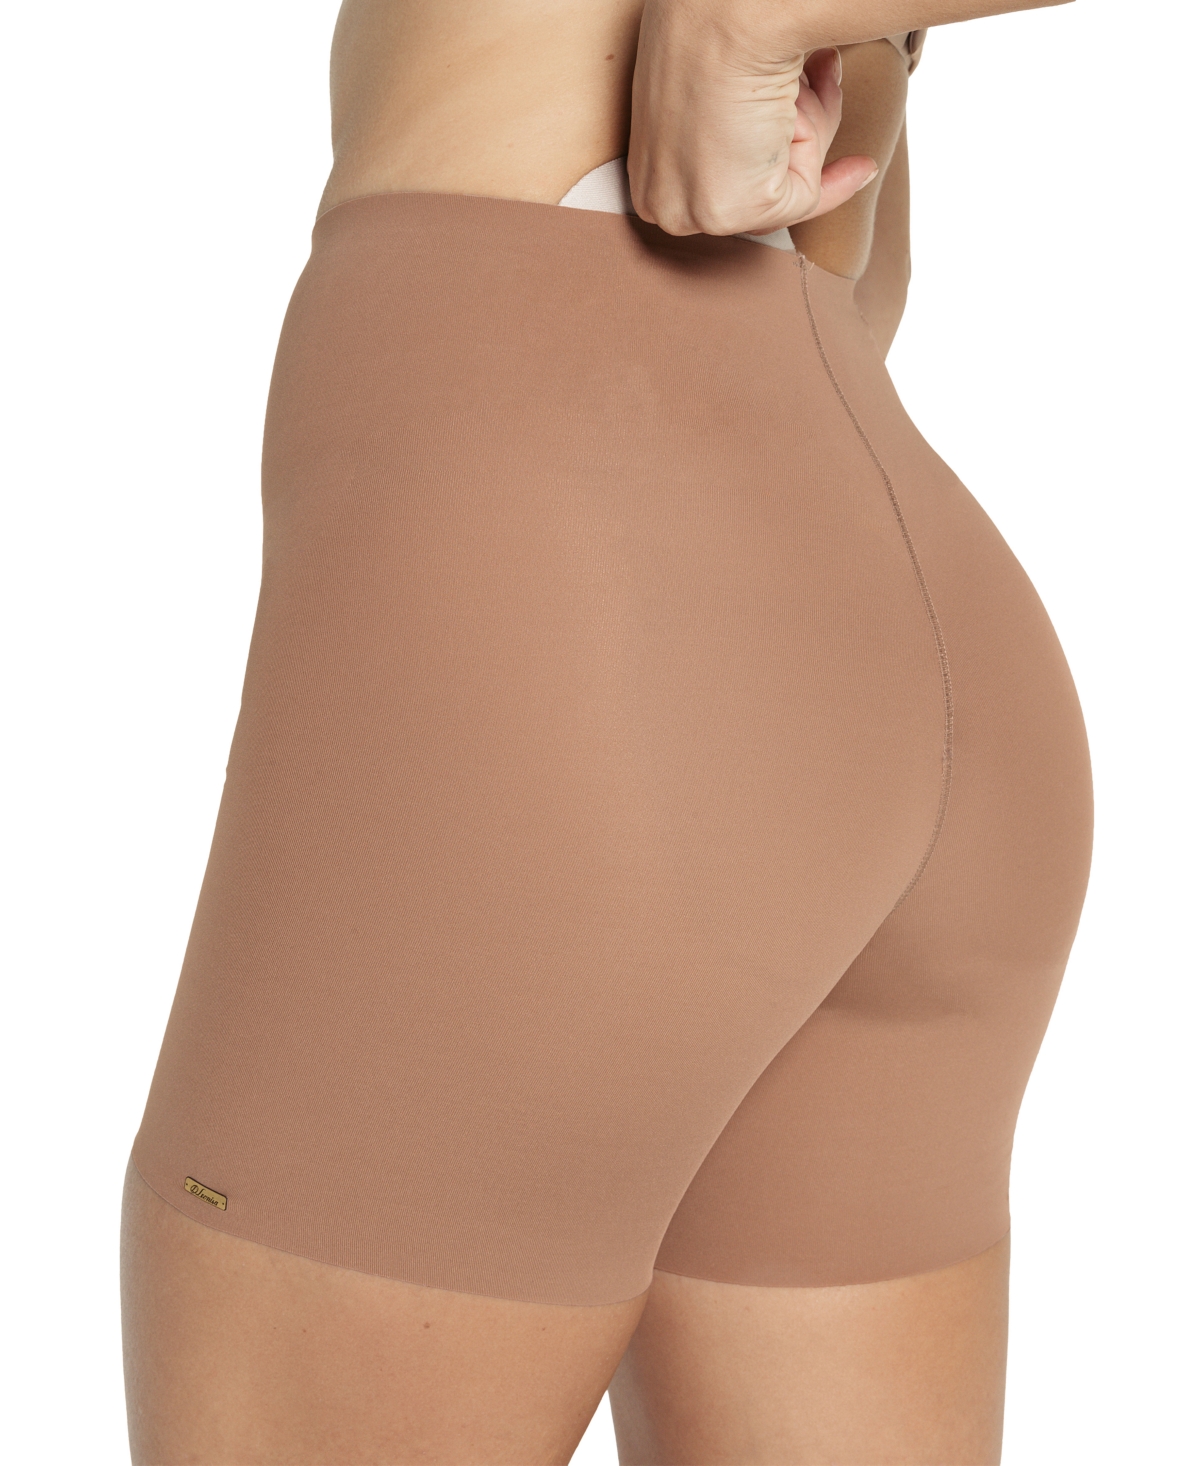 Women's Undetectable Padded Butt Lifter Shaper Shorts - Brown- Nude